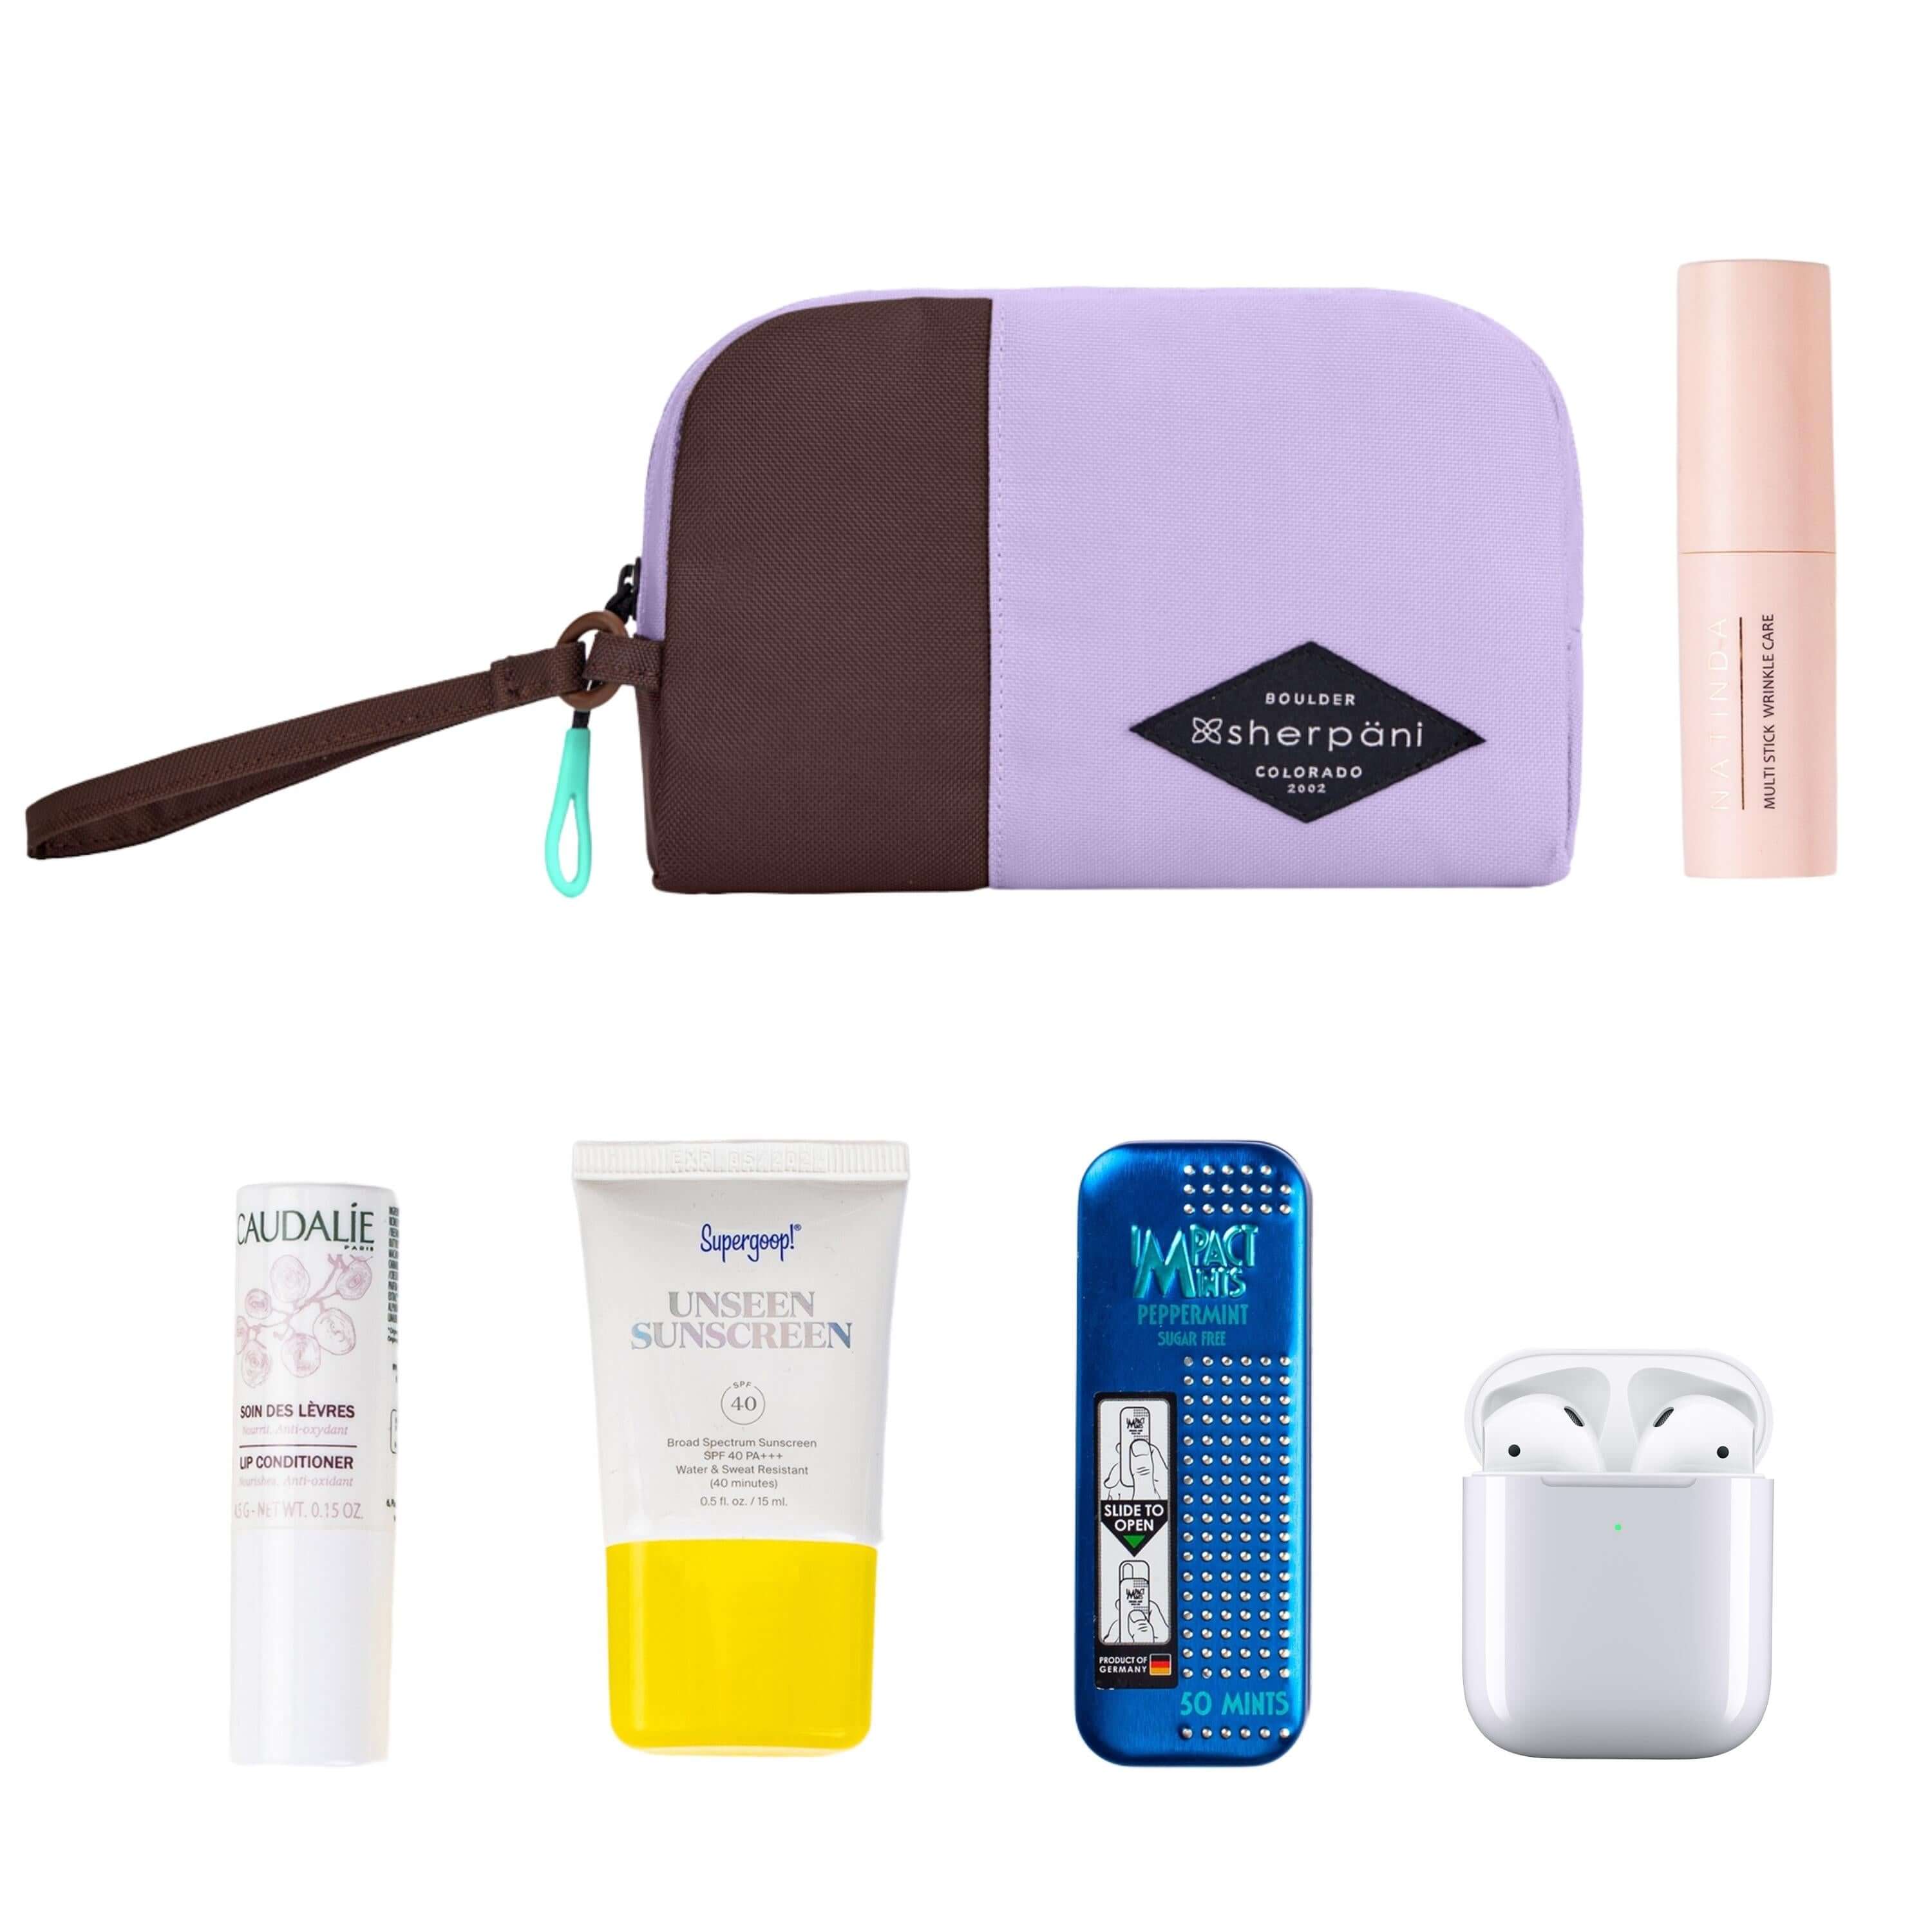 Top view of example items to fill the bag. Sherpani travel accessory, the Jolie in Lavender in small size, lies in the upper left corner. It is surrounded by an assortment of items: beauty product, skincare product, sunscreen, mints and AirPods.